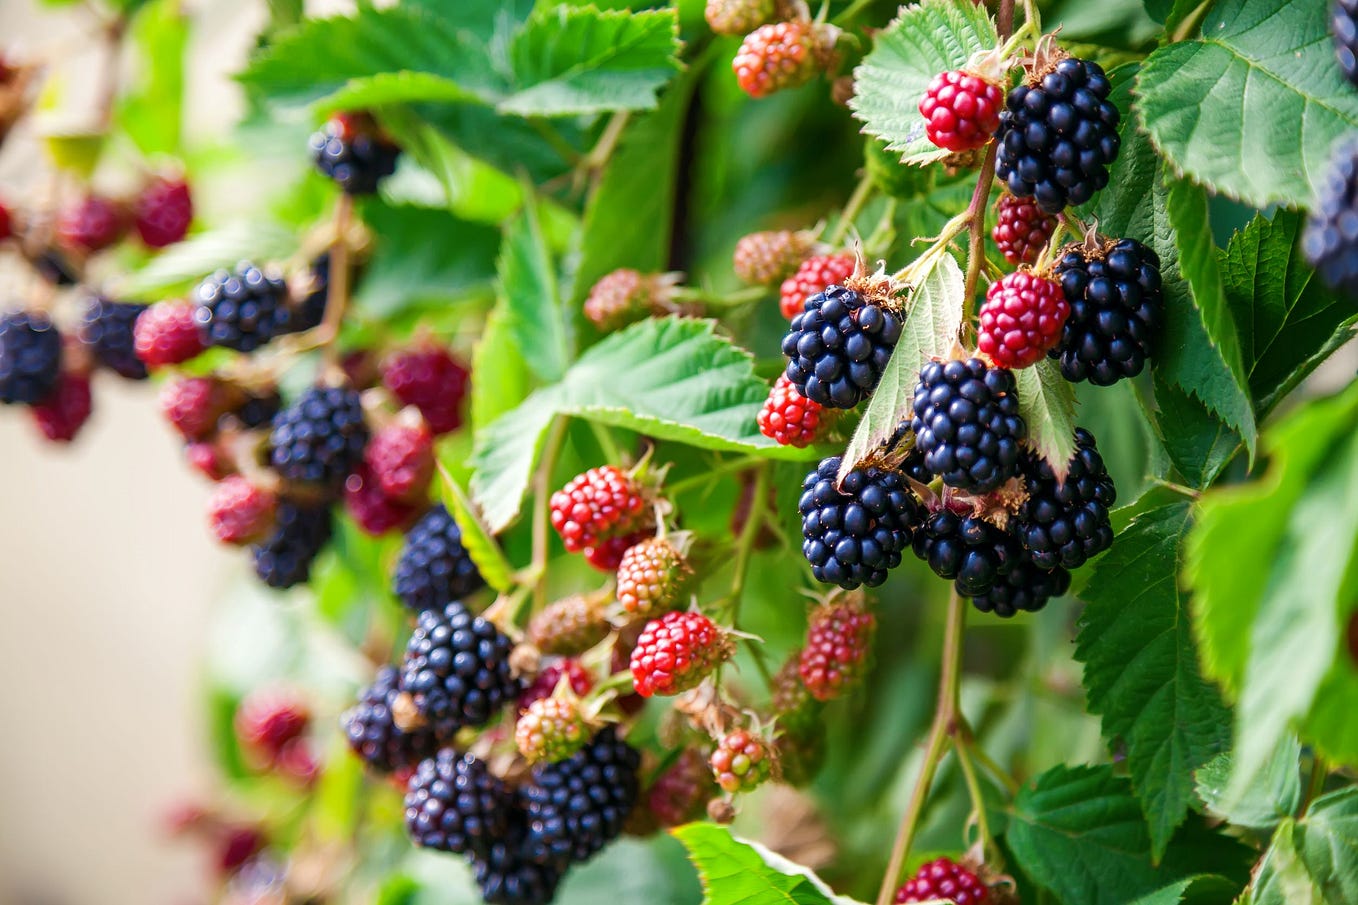 Planting blackberry bushes at home provides you with a bountiful berry harvest year after year.